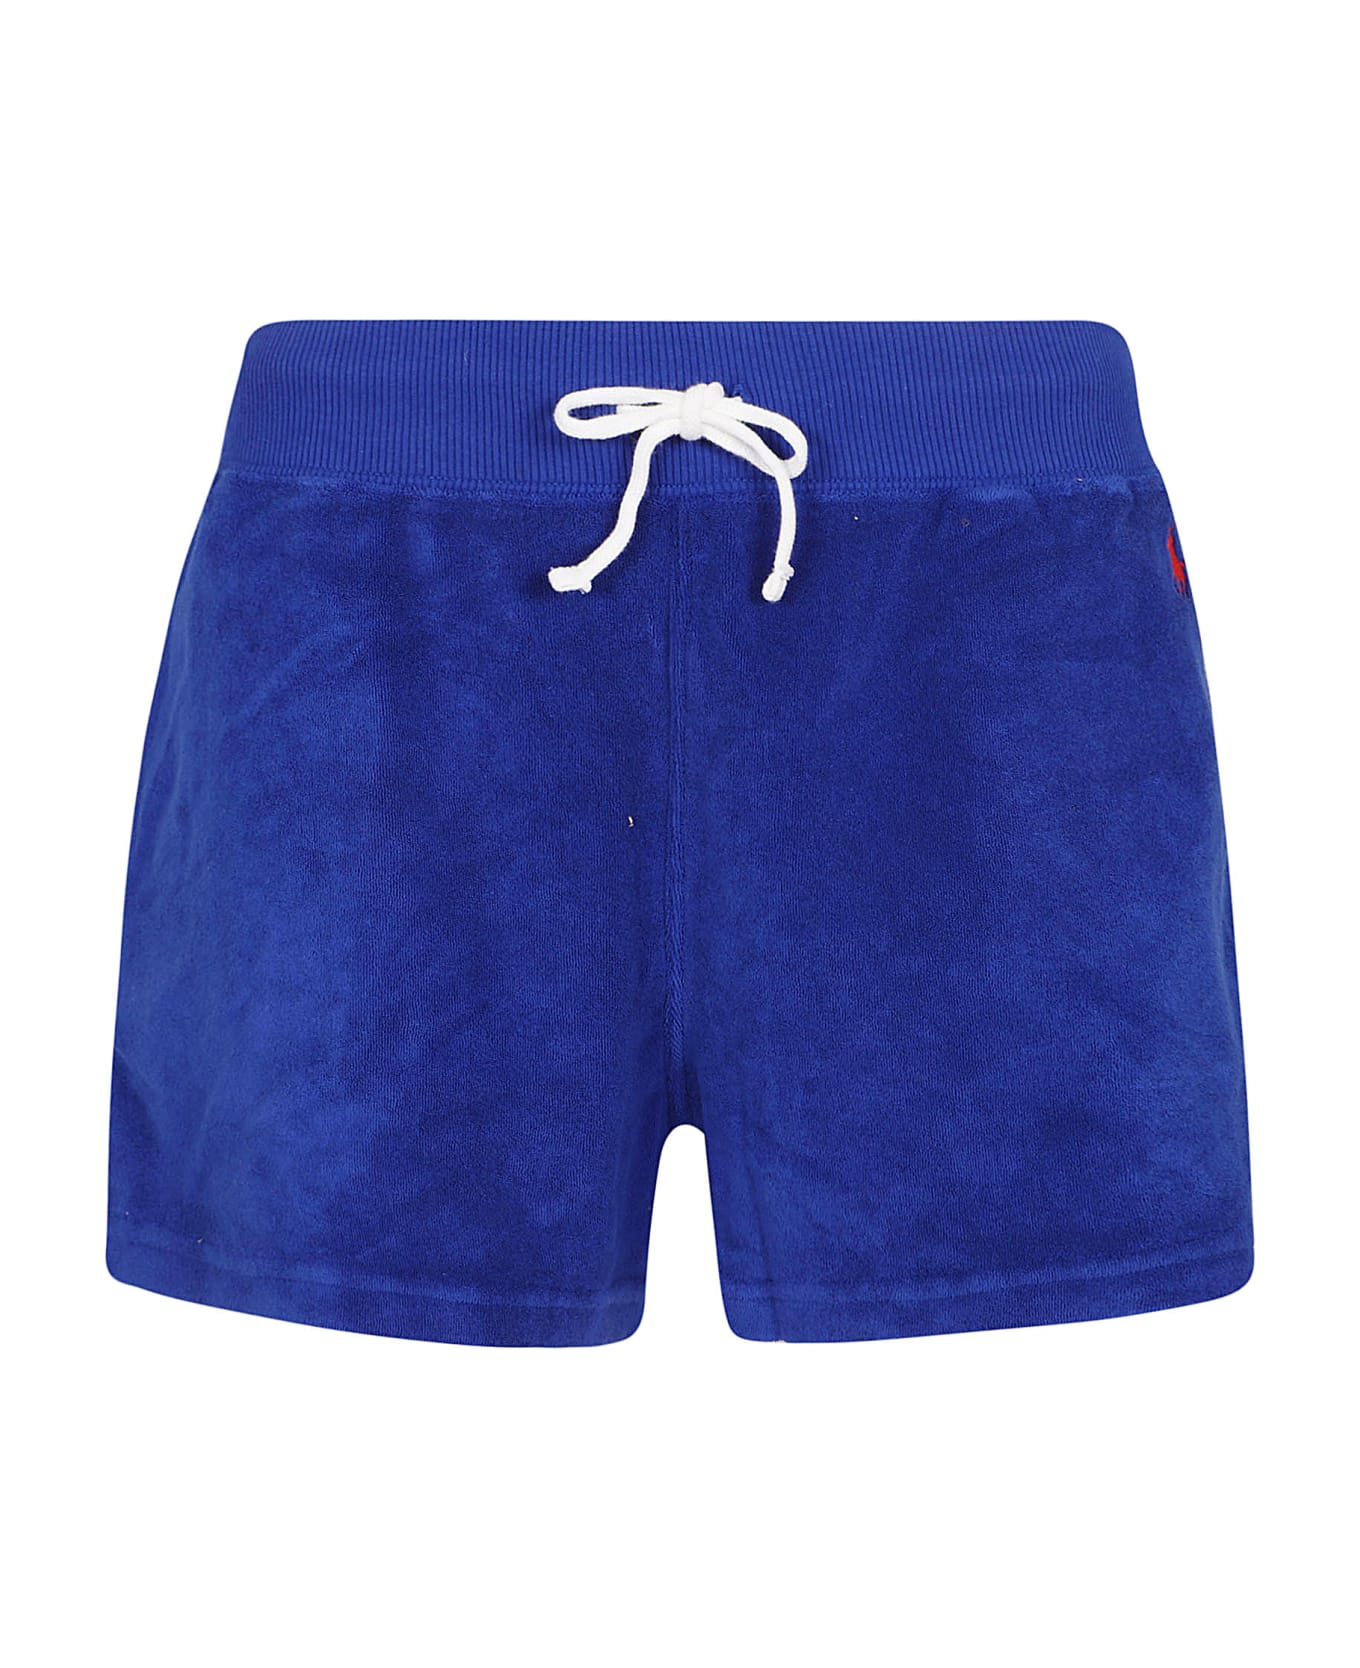 Polo Ralph Lauren Terry Short-athletic - Heritage Royal